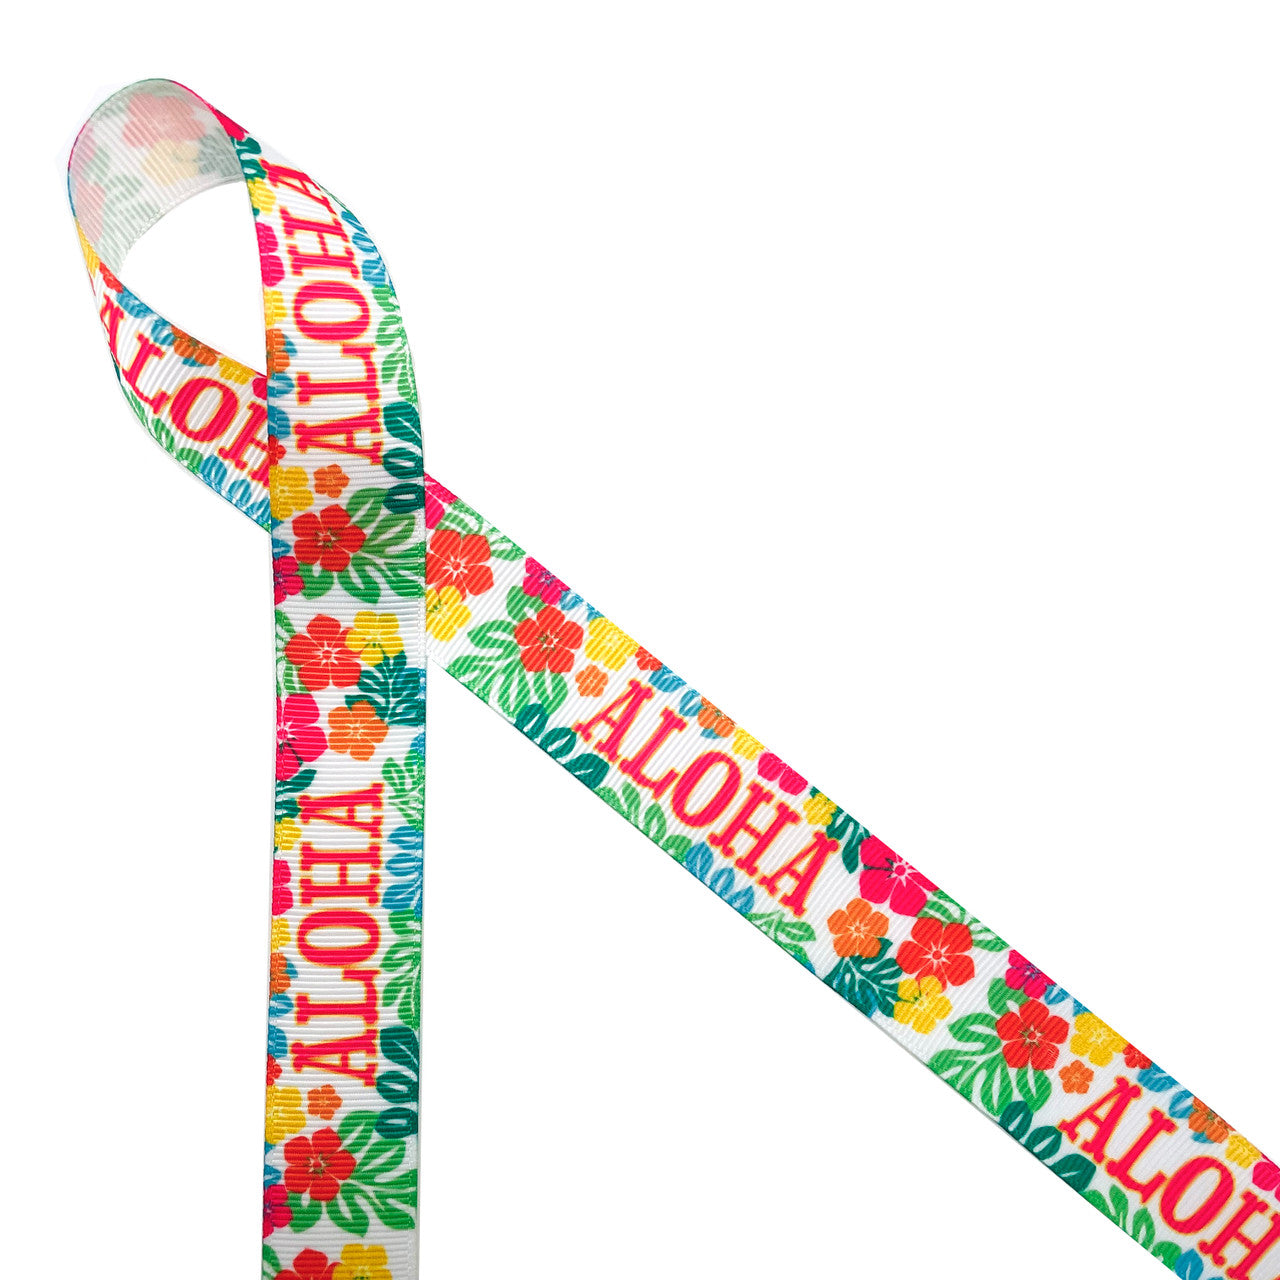 Aloha Hawaiian themed ribbon with tropical flowers in pink, orange, yellow and green printed on 7/8" white grosgrain ribbon is an ideal ribbon for tropical themed parties and crafts! This is an ideal ribbon for hair bows, head bands, hat bands and gift wrap! Use this ribbon for quilting, sewing and craft projects too! All our ribbon is designed and printed in the US